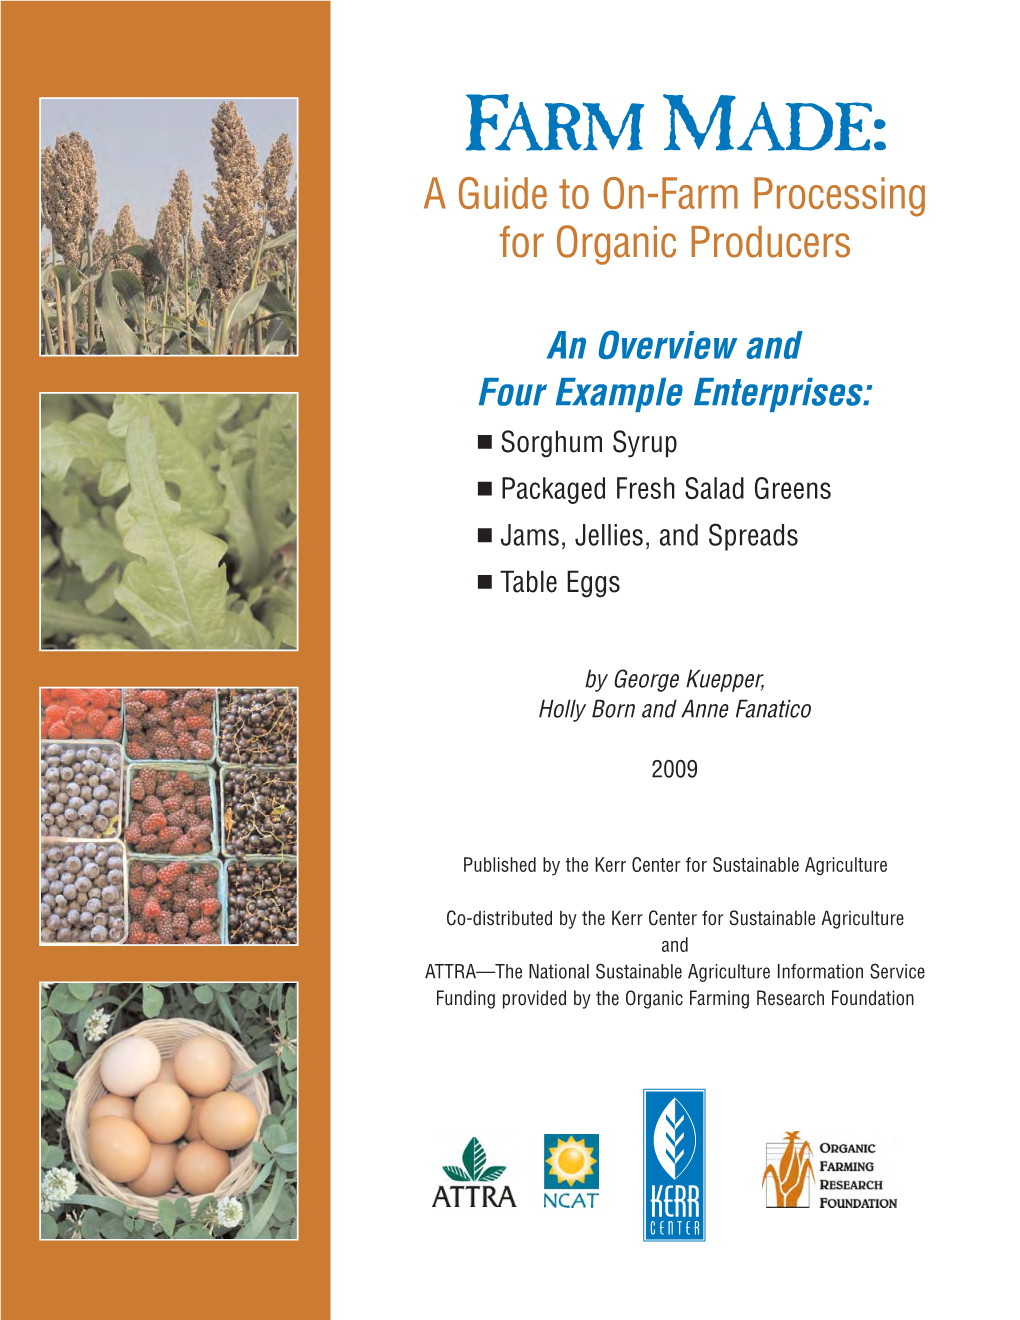 FARM MADE: a Guide to On-Farm Processing for Organic Producers